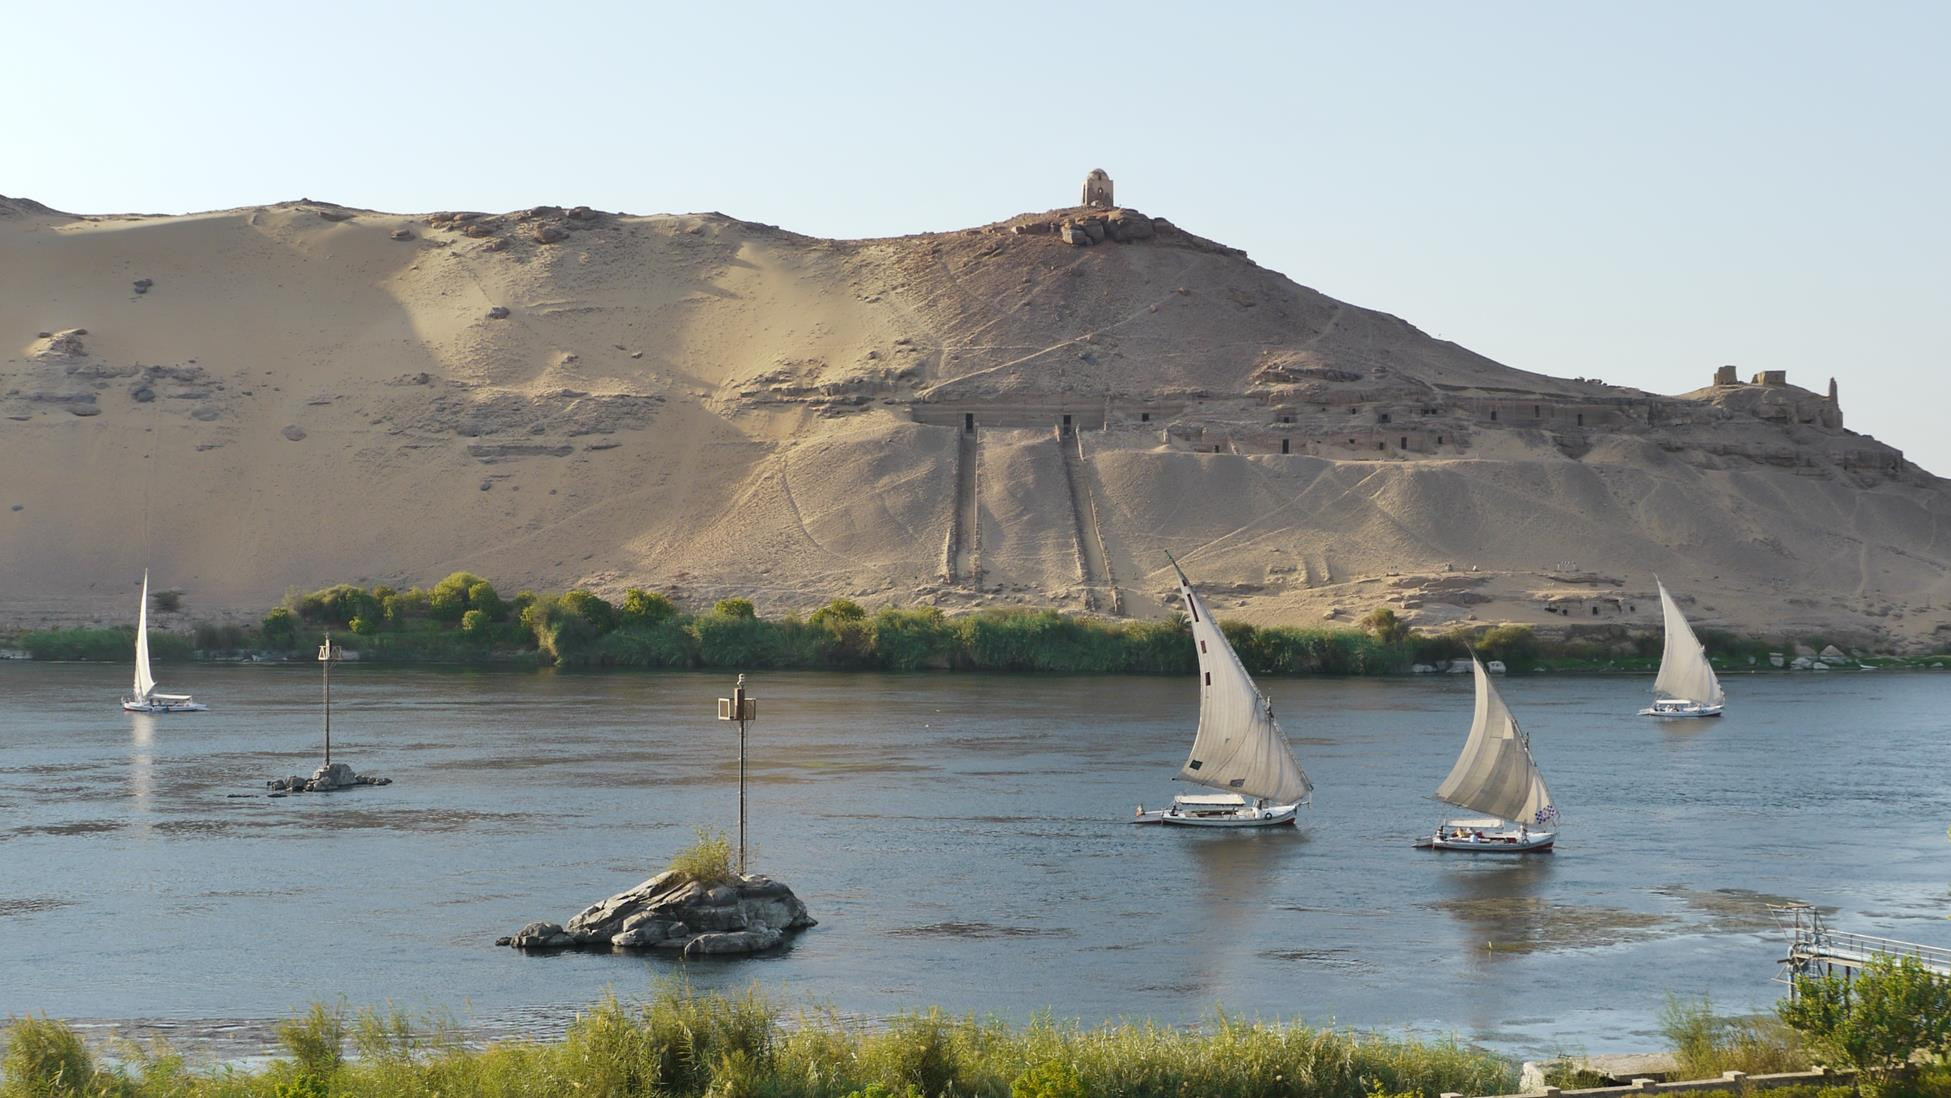 The view from our hotel in Aswan, looking across the Nile to the Tombs of the Nobles